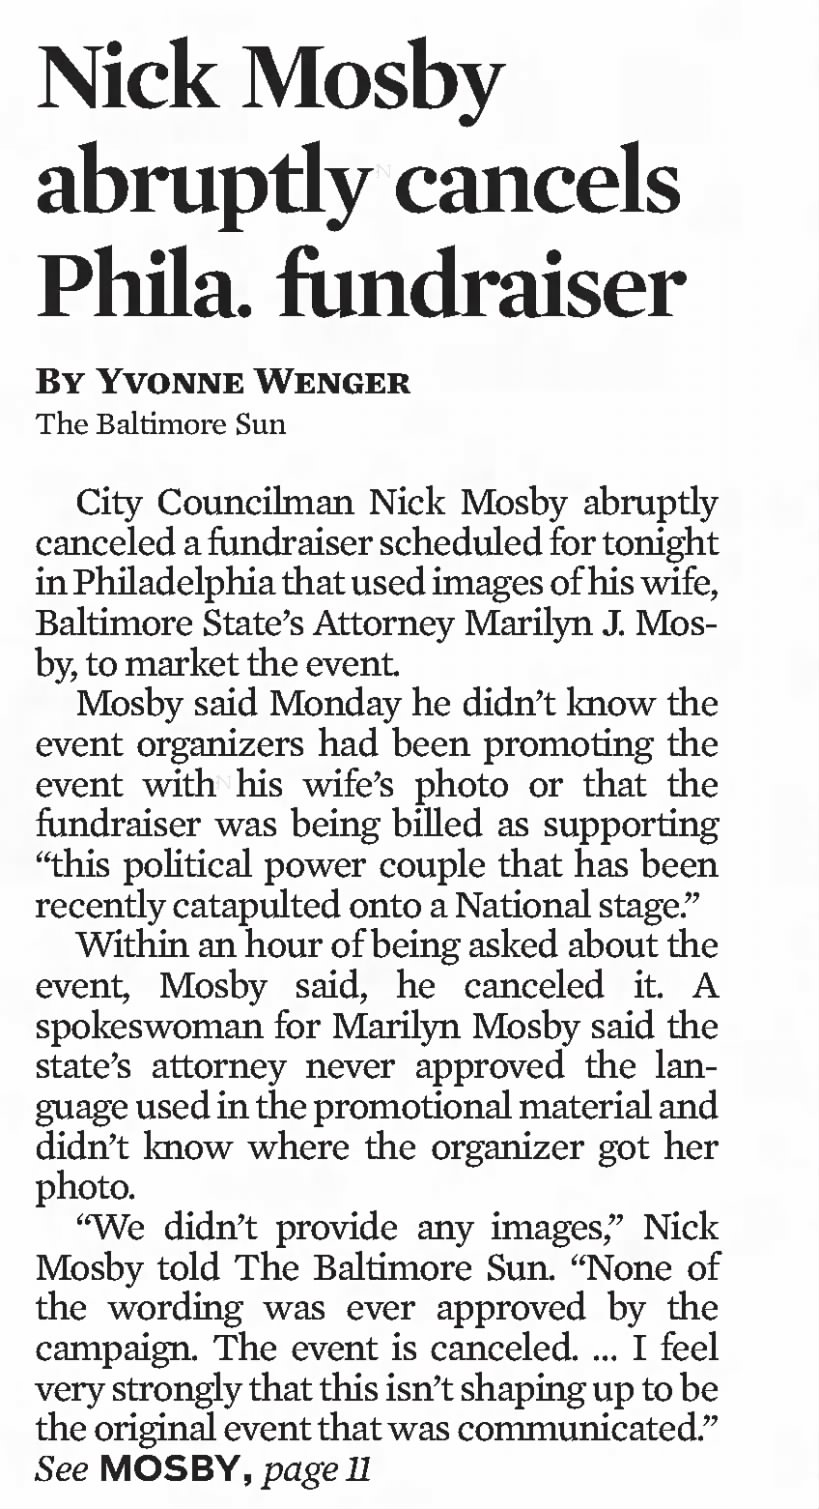 Nick Mosby abruptly cancels Phila. fundraiser